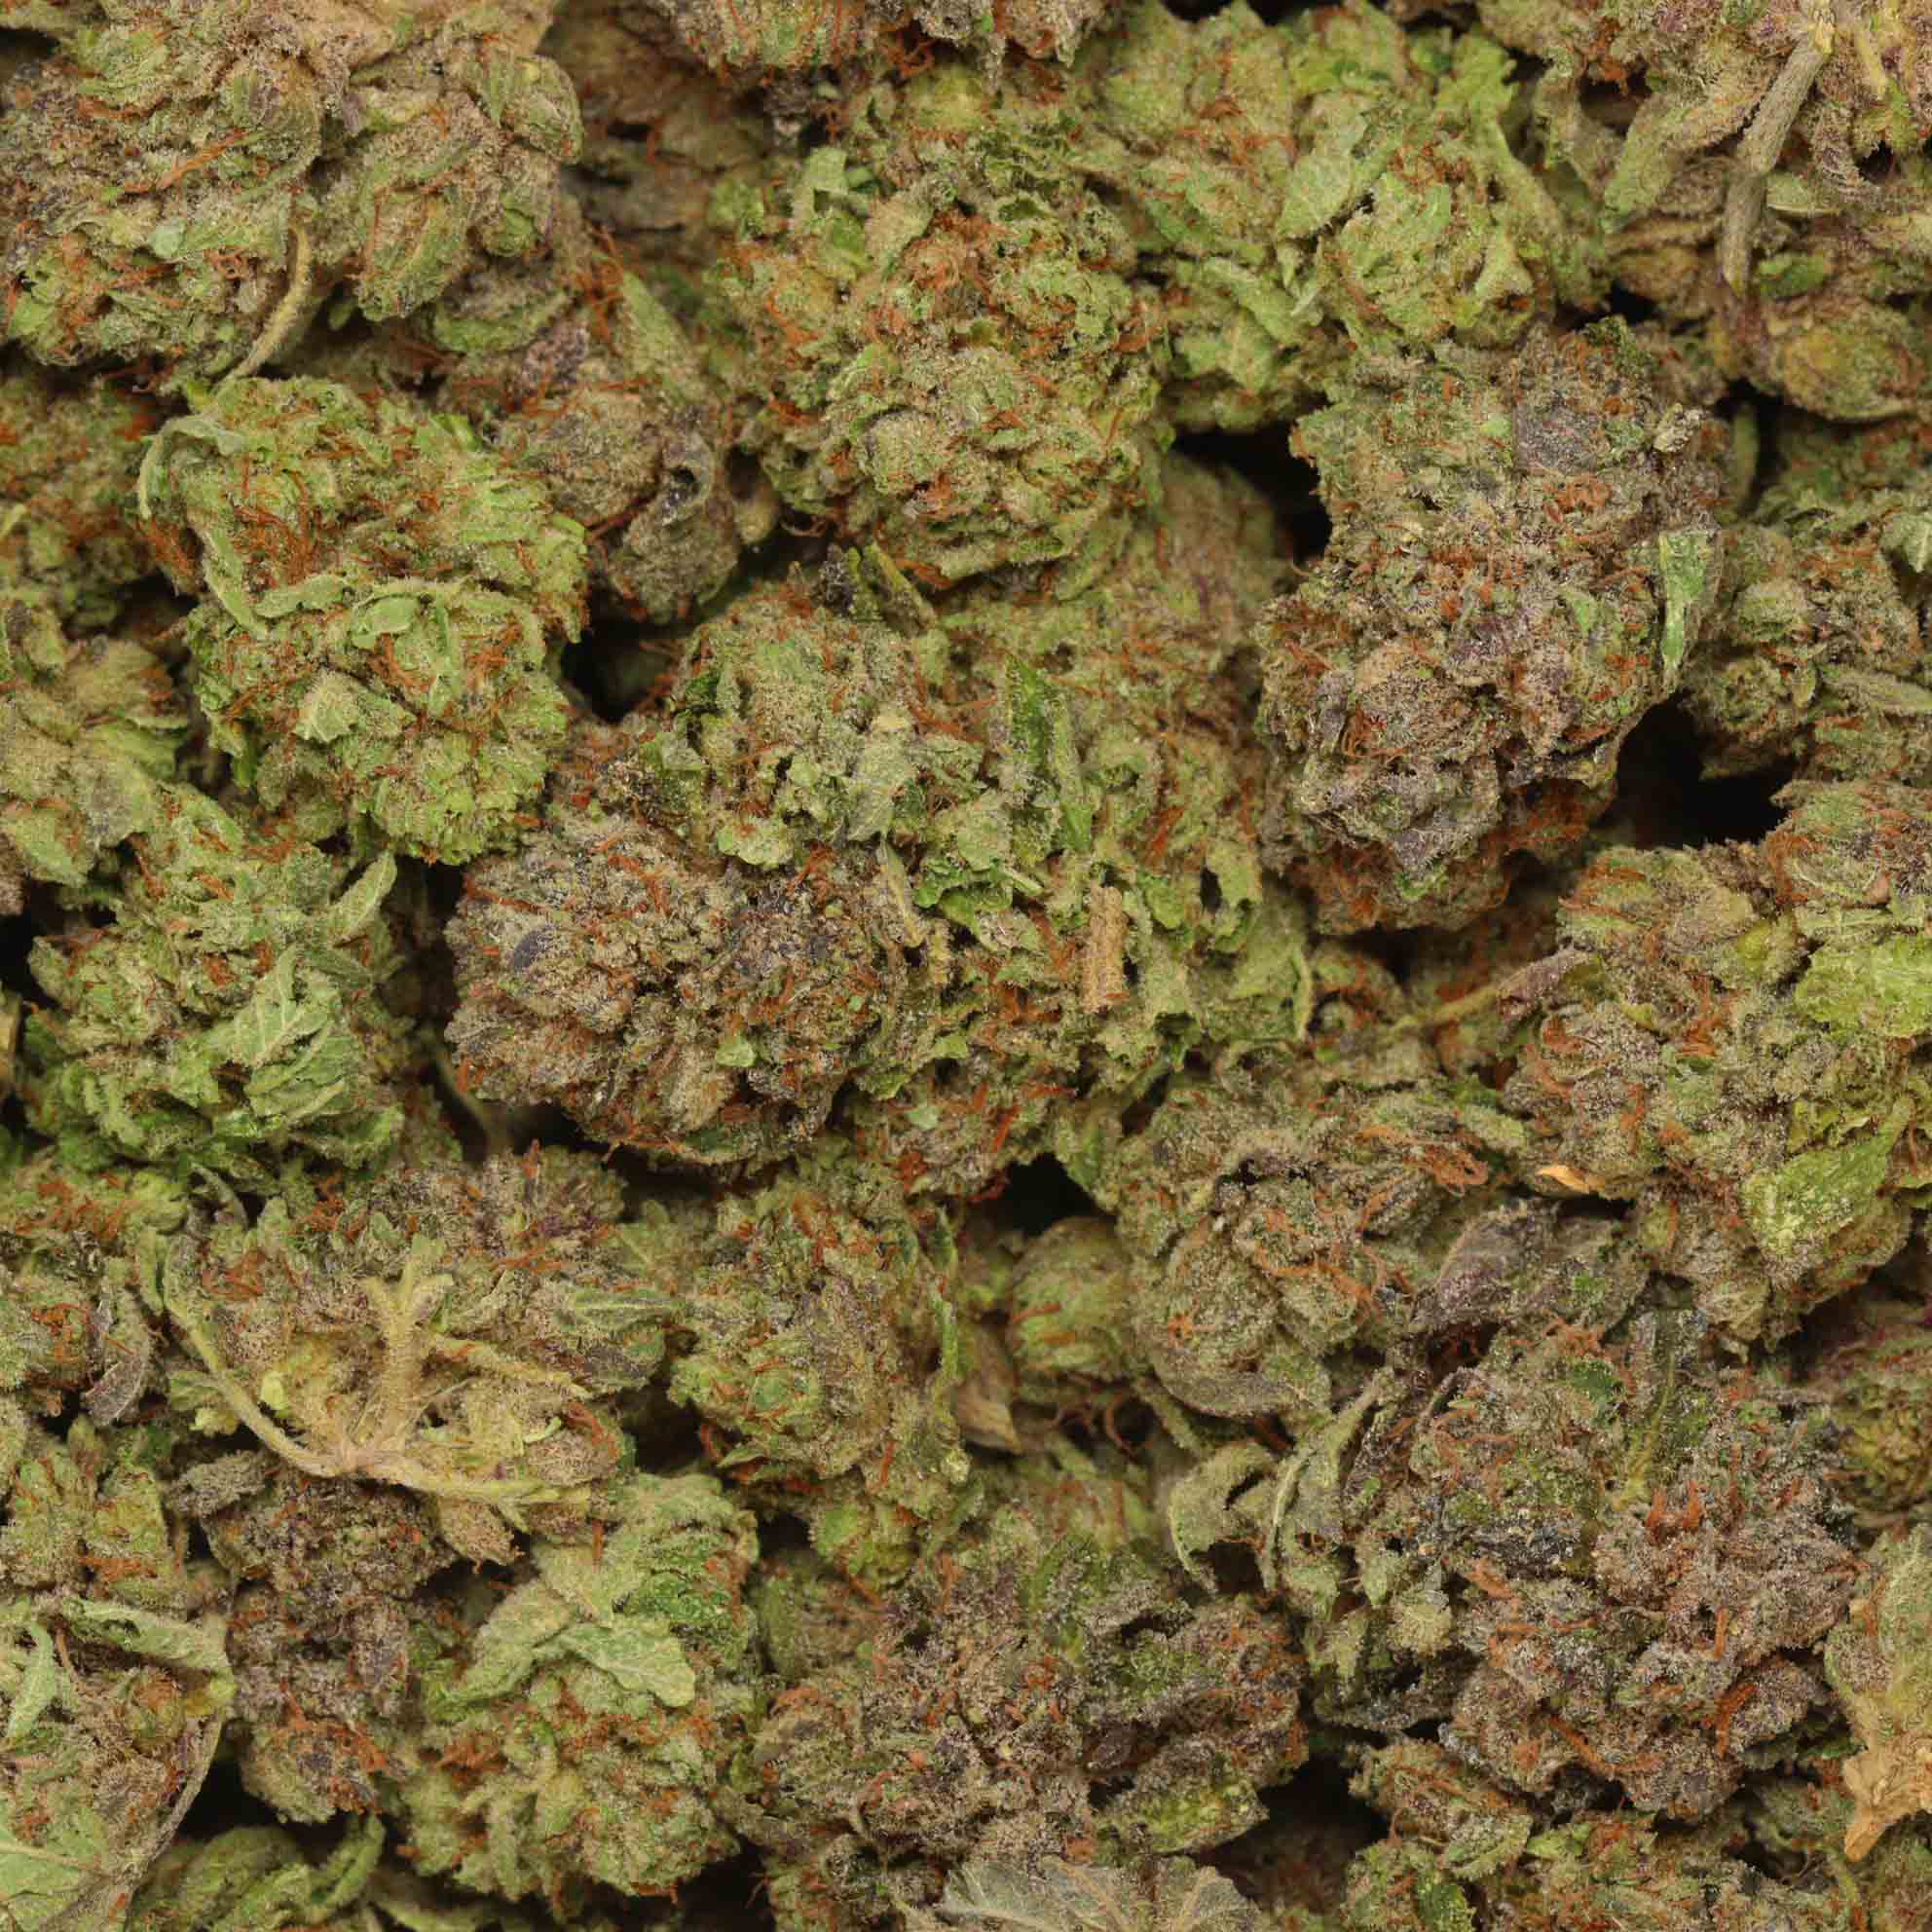 Pink Taffy by Wca  West Coast Weed Reviews